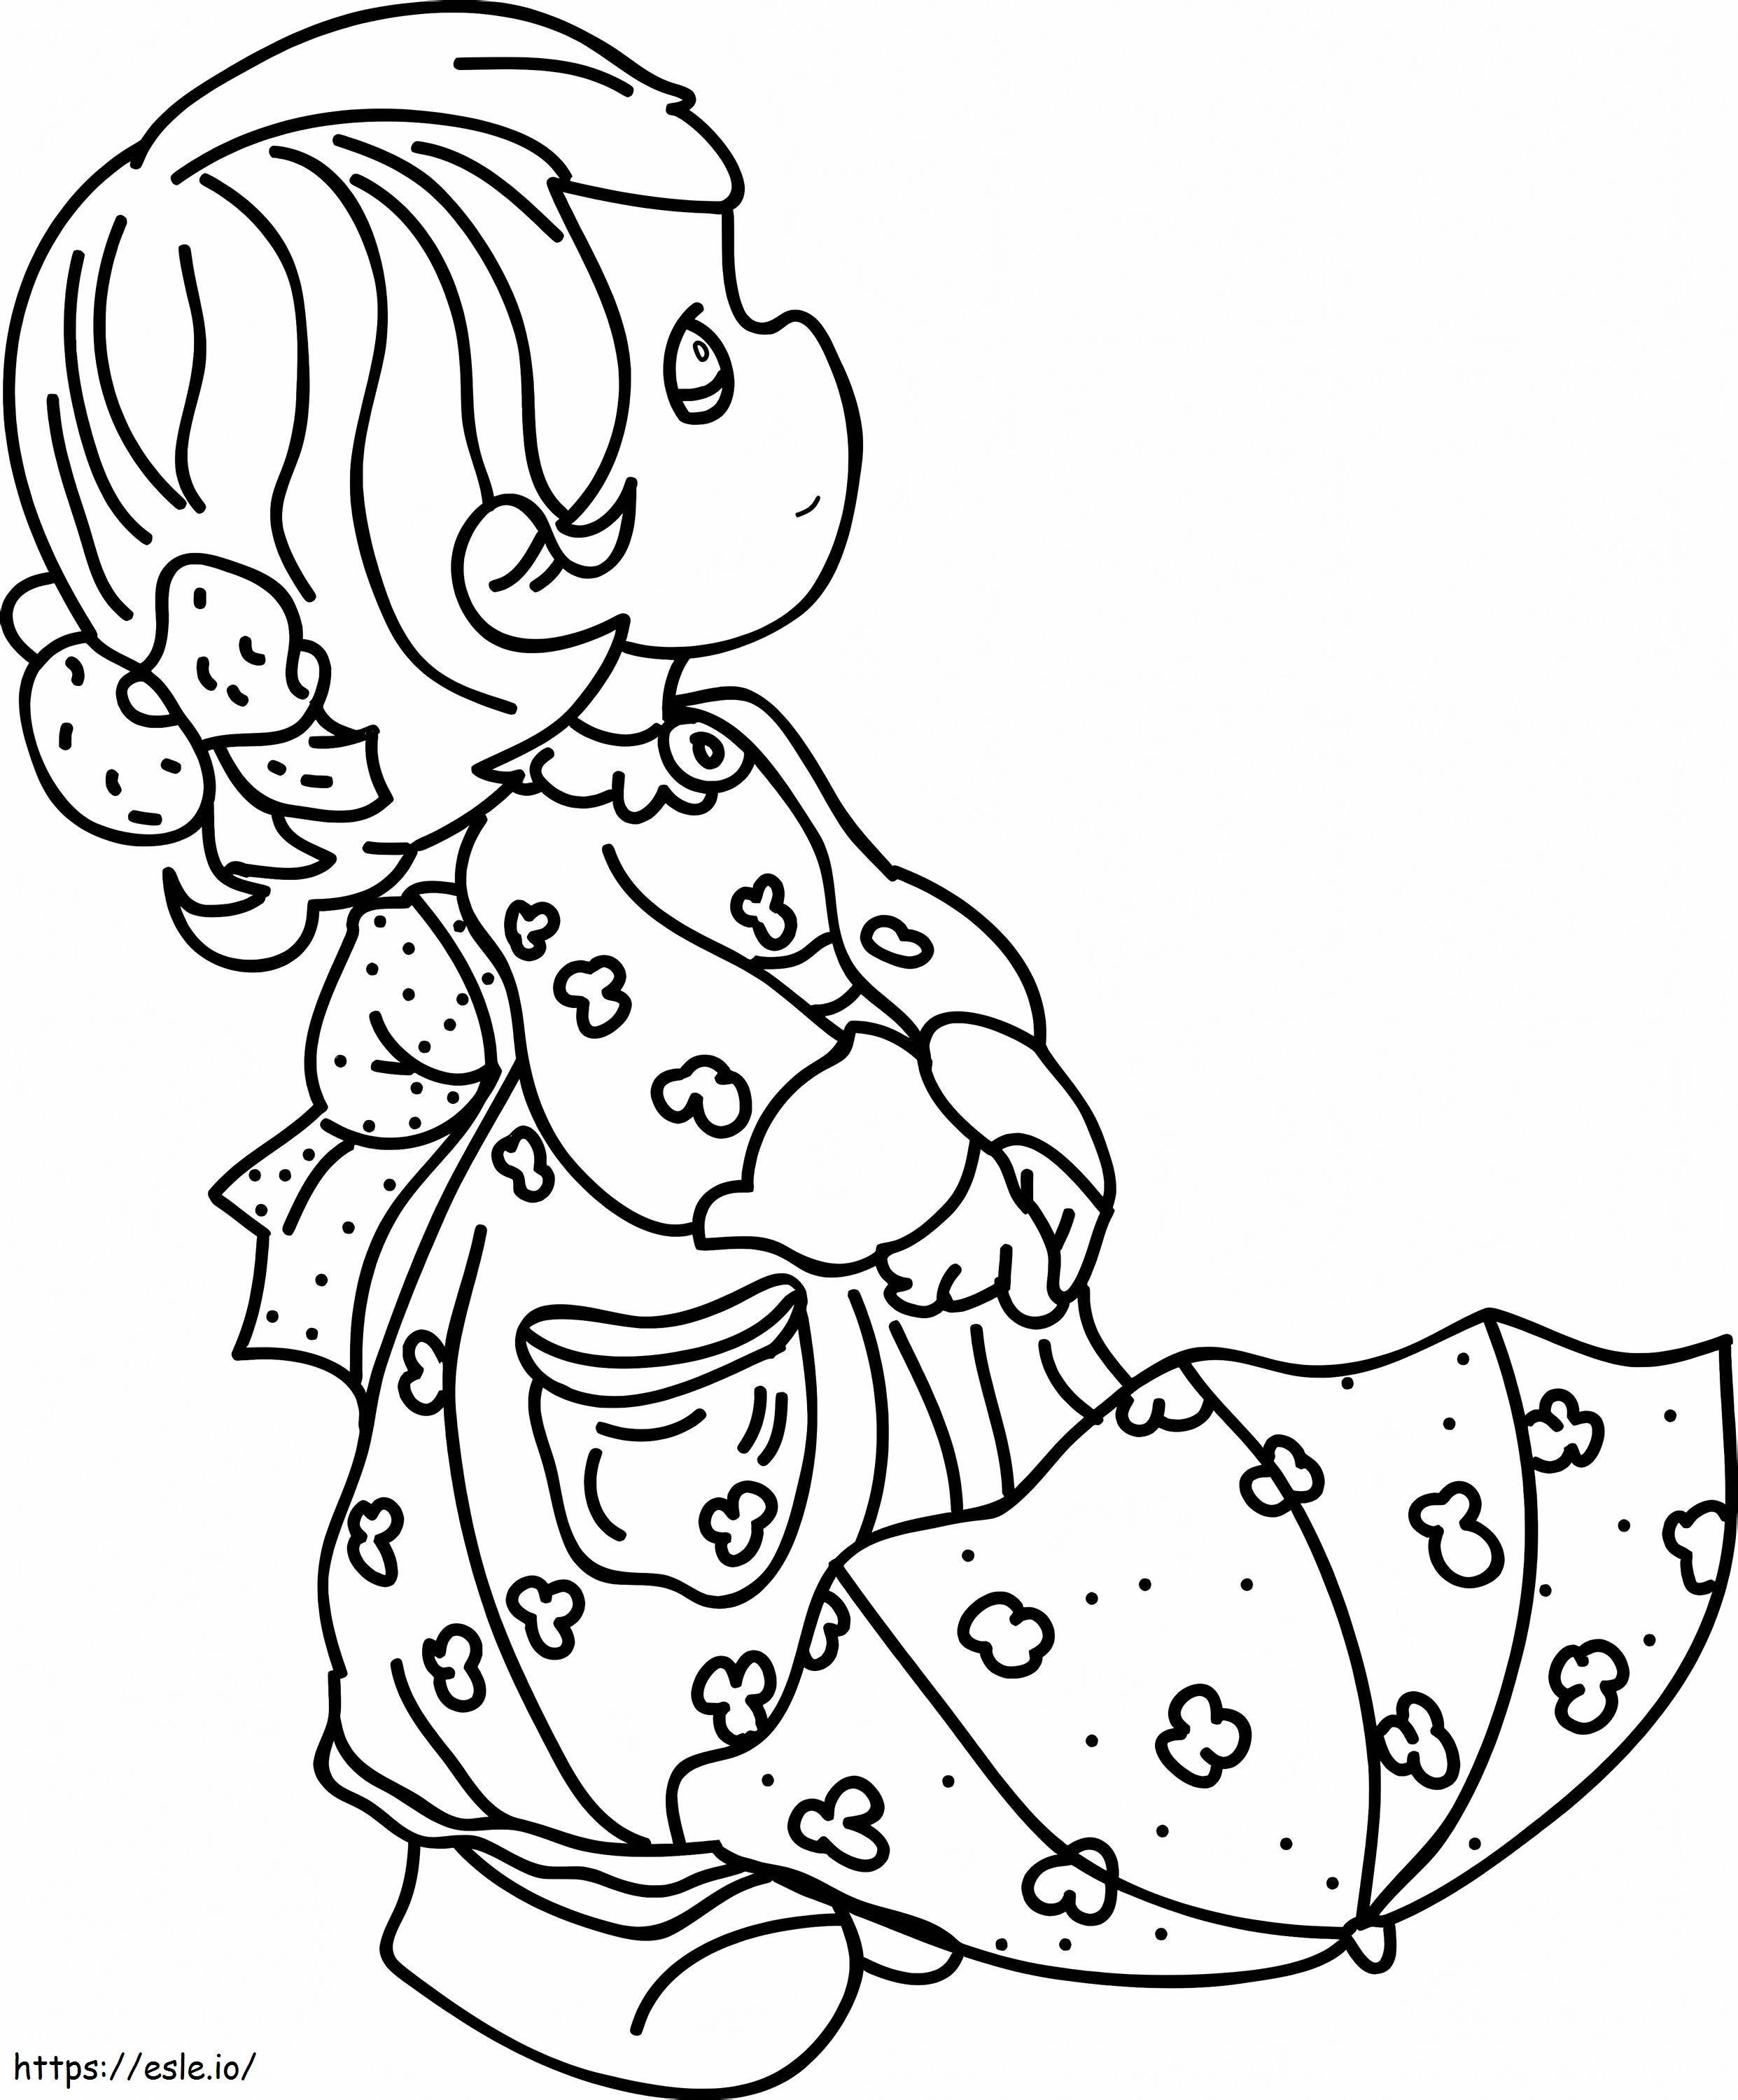 Fire With Umbrella coloring page